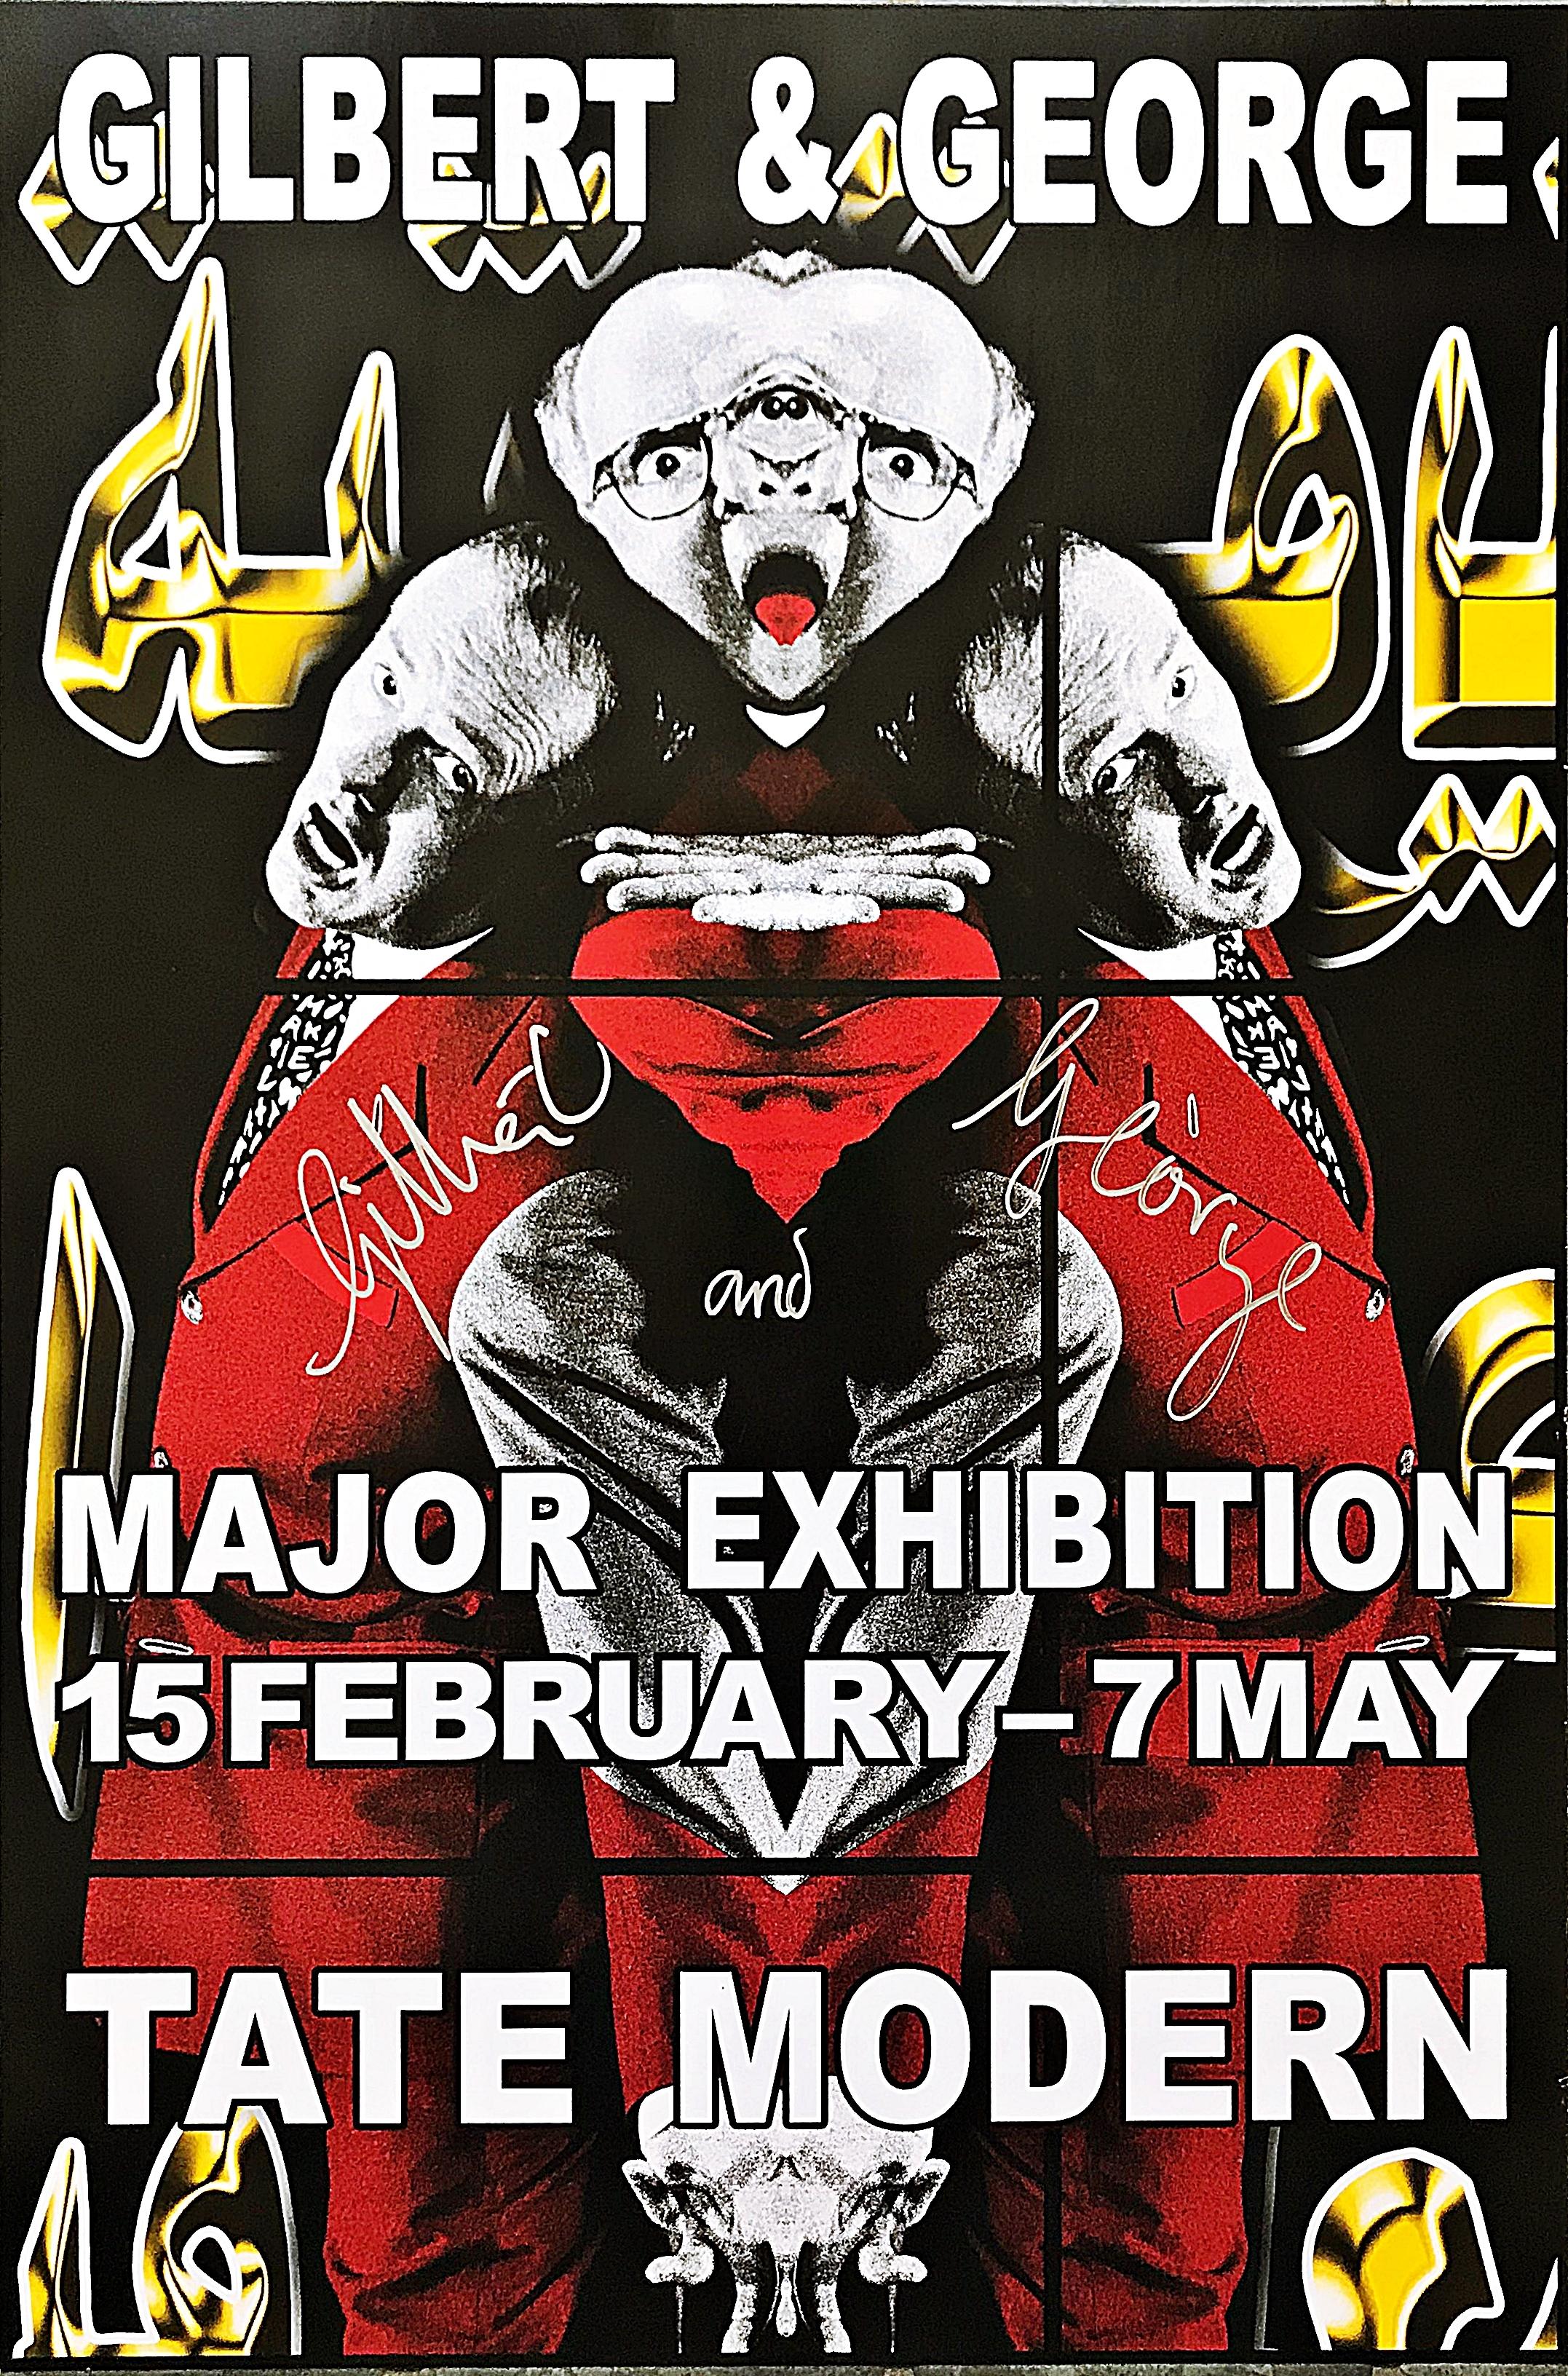 Gilbert and George Major Exhibition, Tate Modern (Hand Signed)